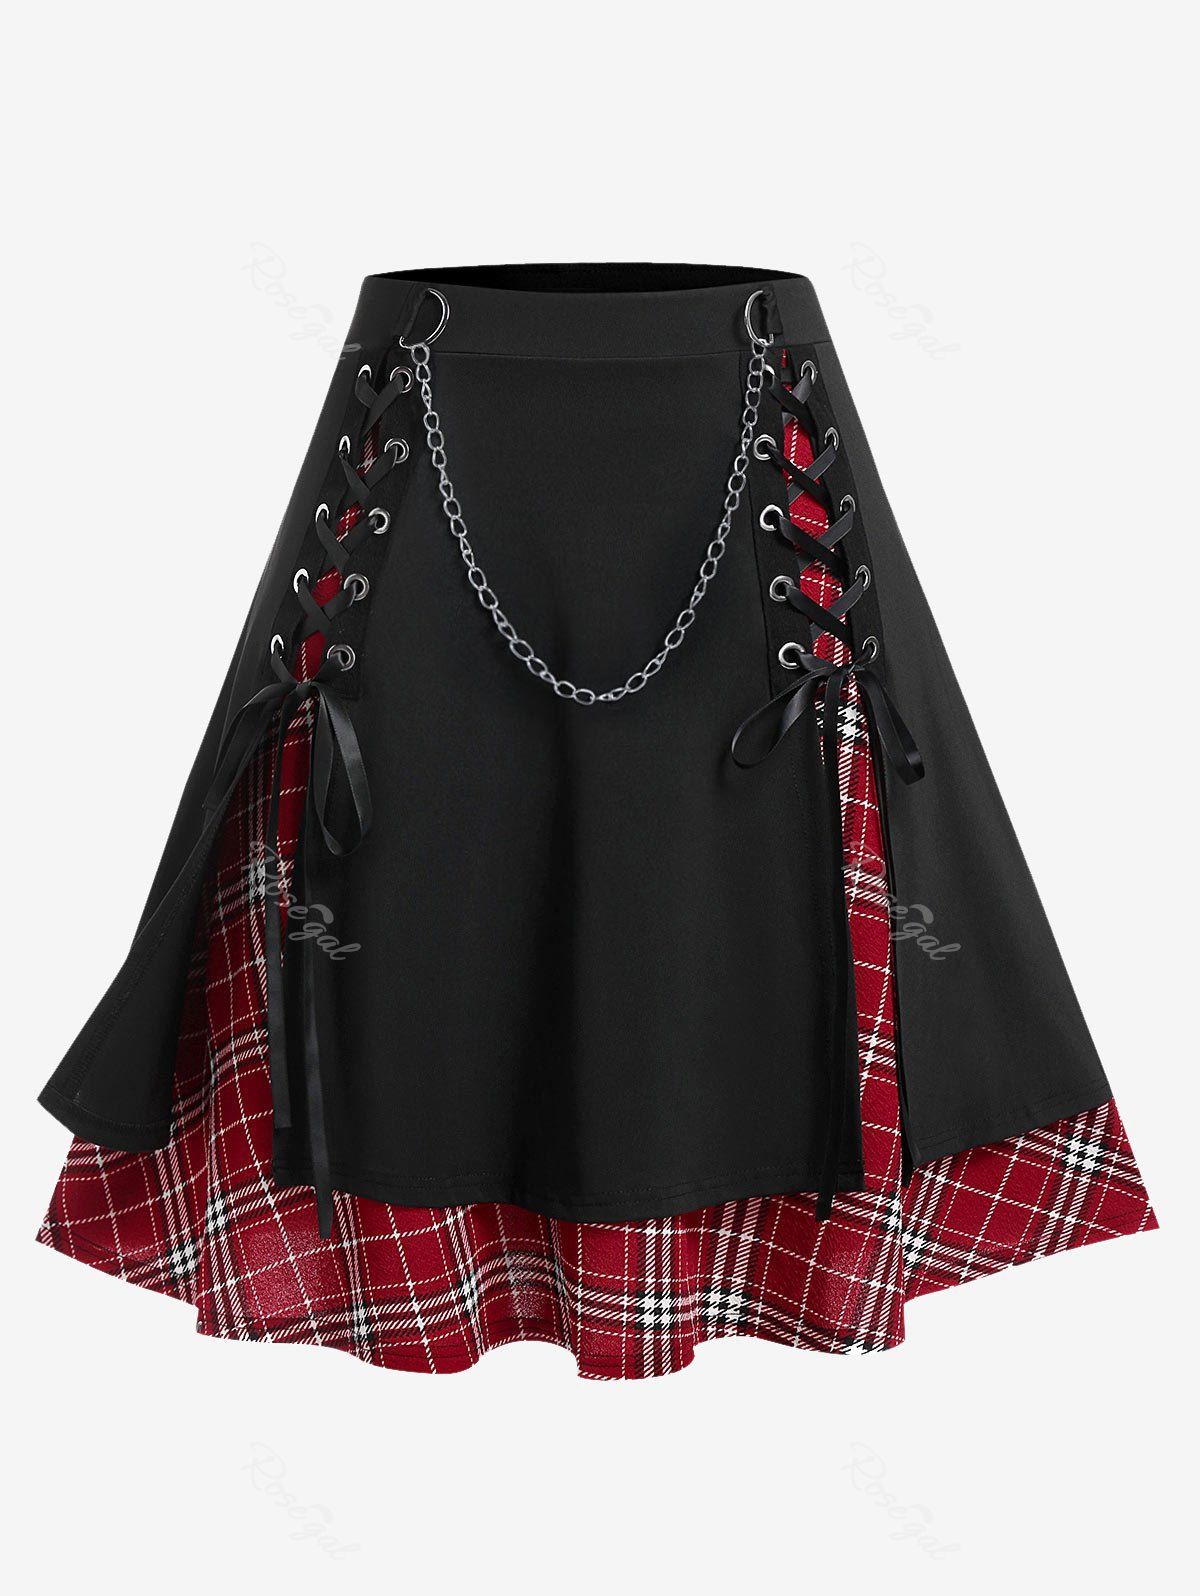 Hot Gothic Chains Lace Up Layered Plaid Skirt  